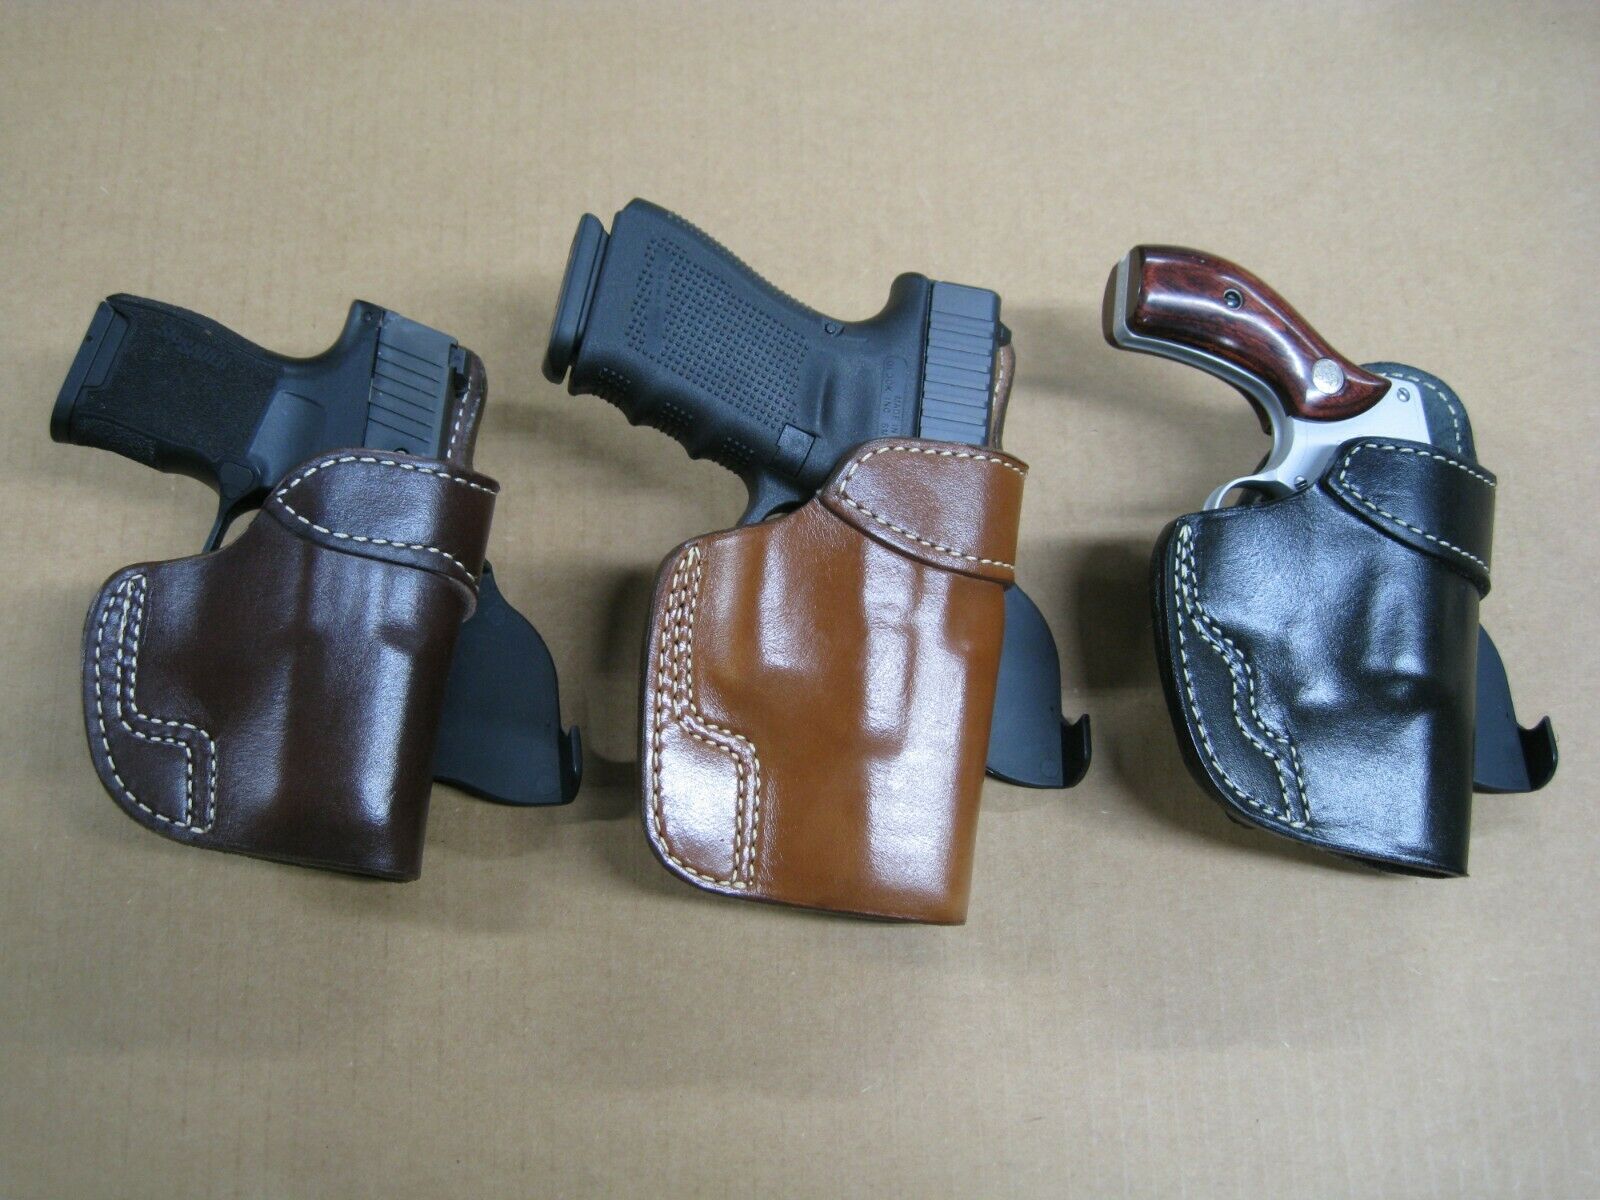 Details about   Leather Paddle Holster Open Top Fits STI Range Master Edge 9/45 ACP 5"BBL #1364# 